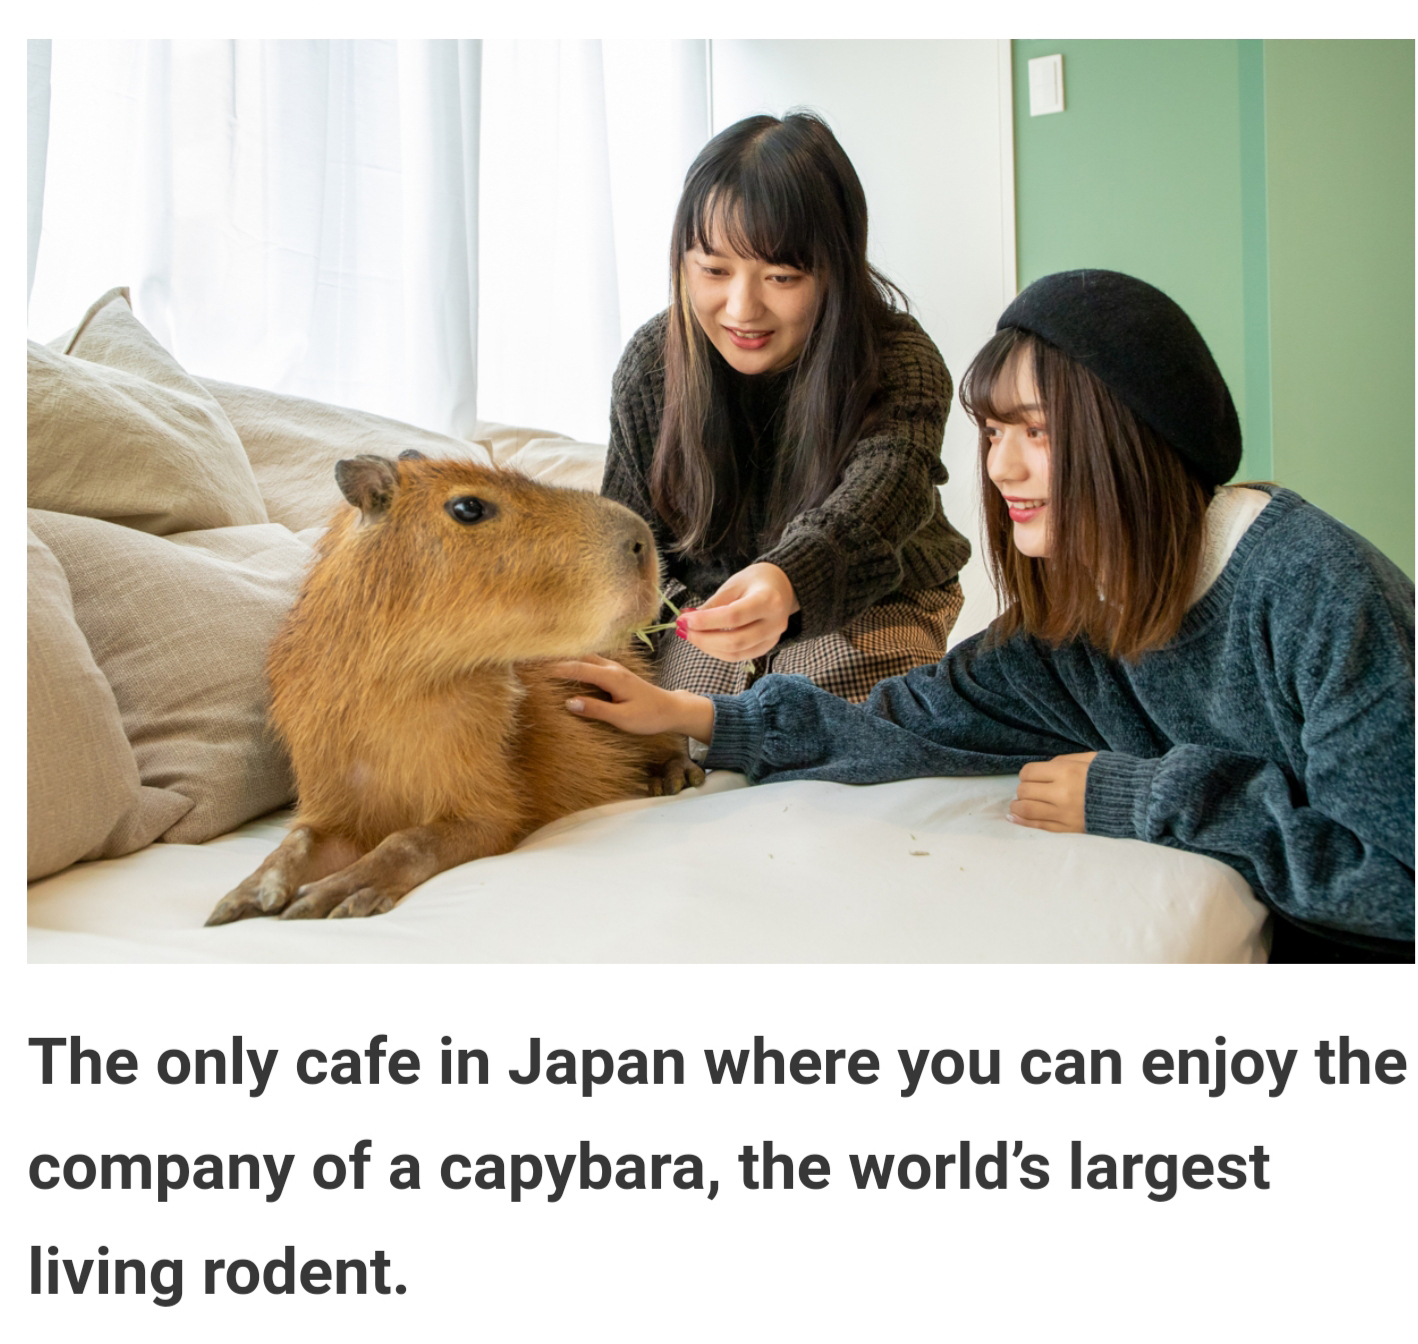 photo caption - The only cafe in Japan where you can enjoy the company of a capybara, the world's largest living rodent.